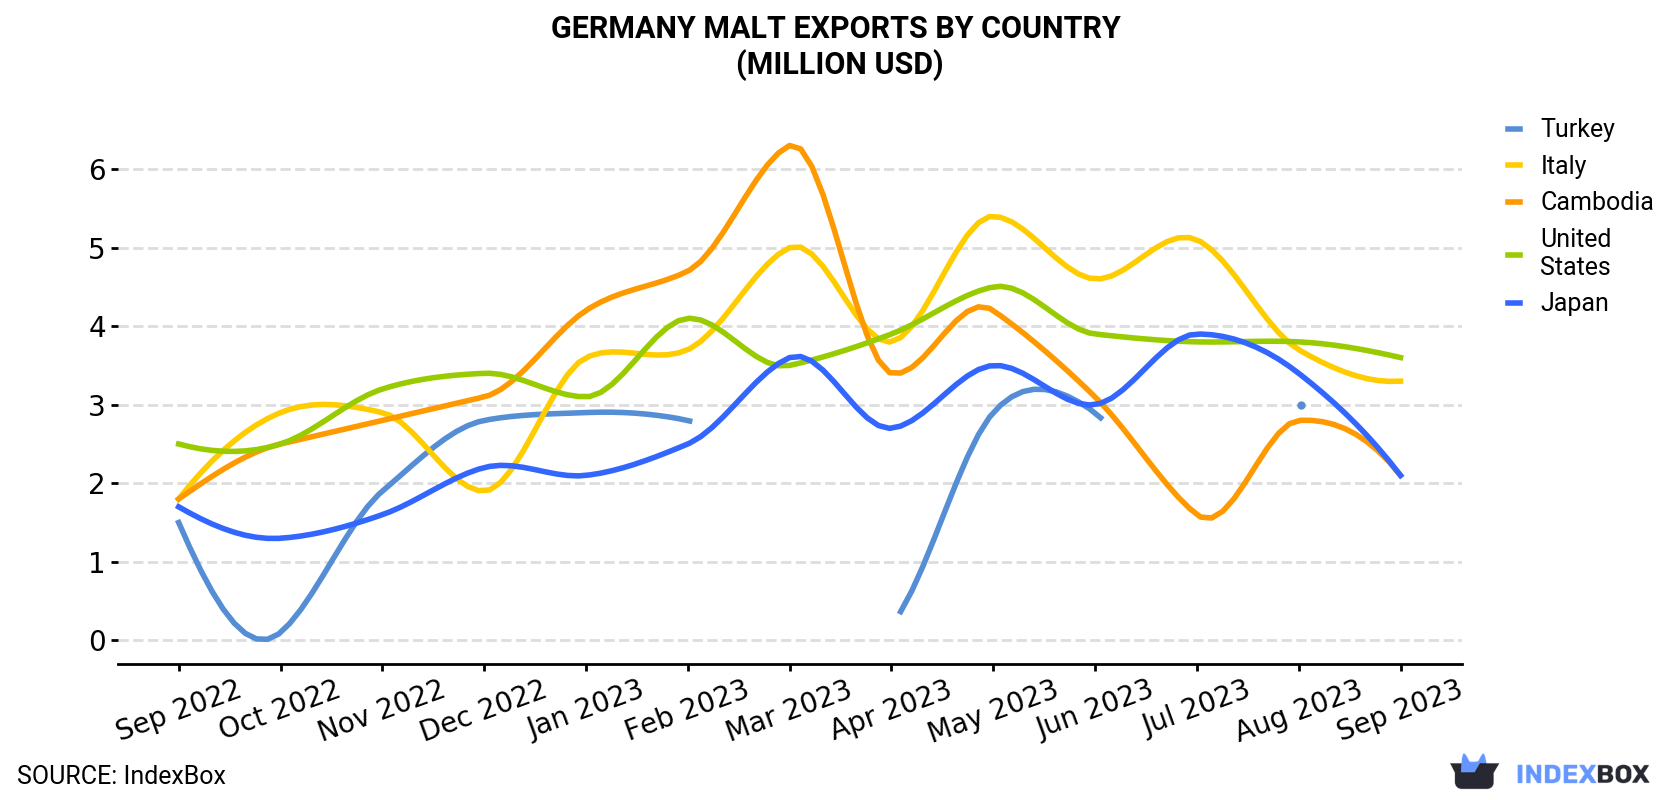 Germany Malt Exports By Country (Million USD)